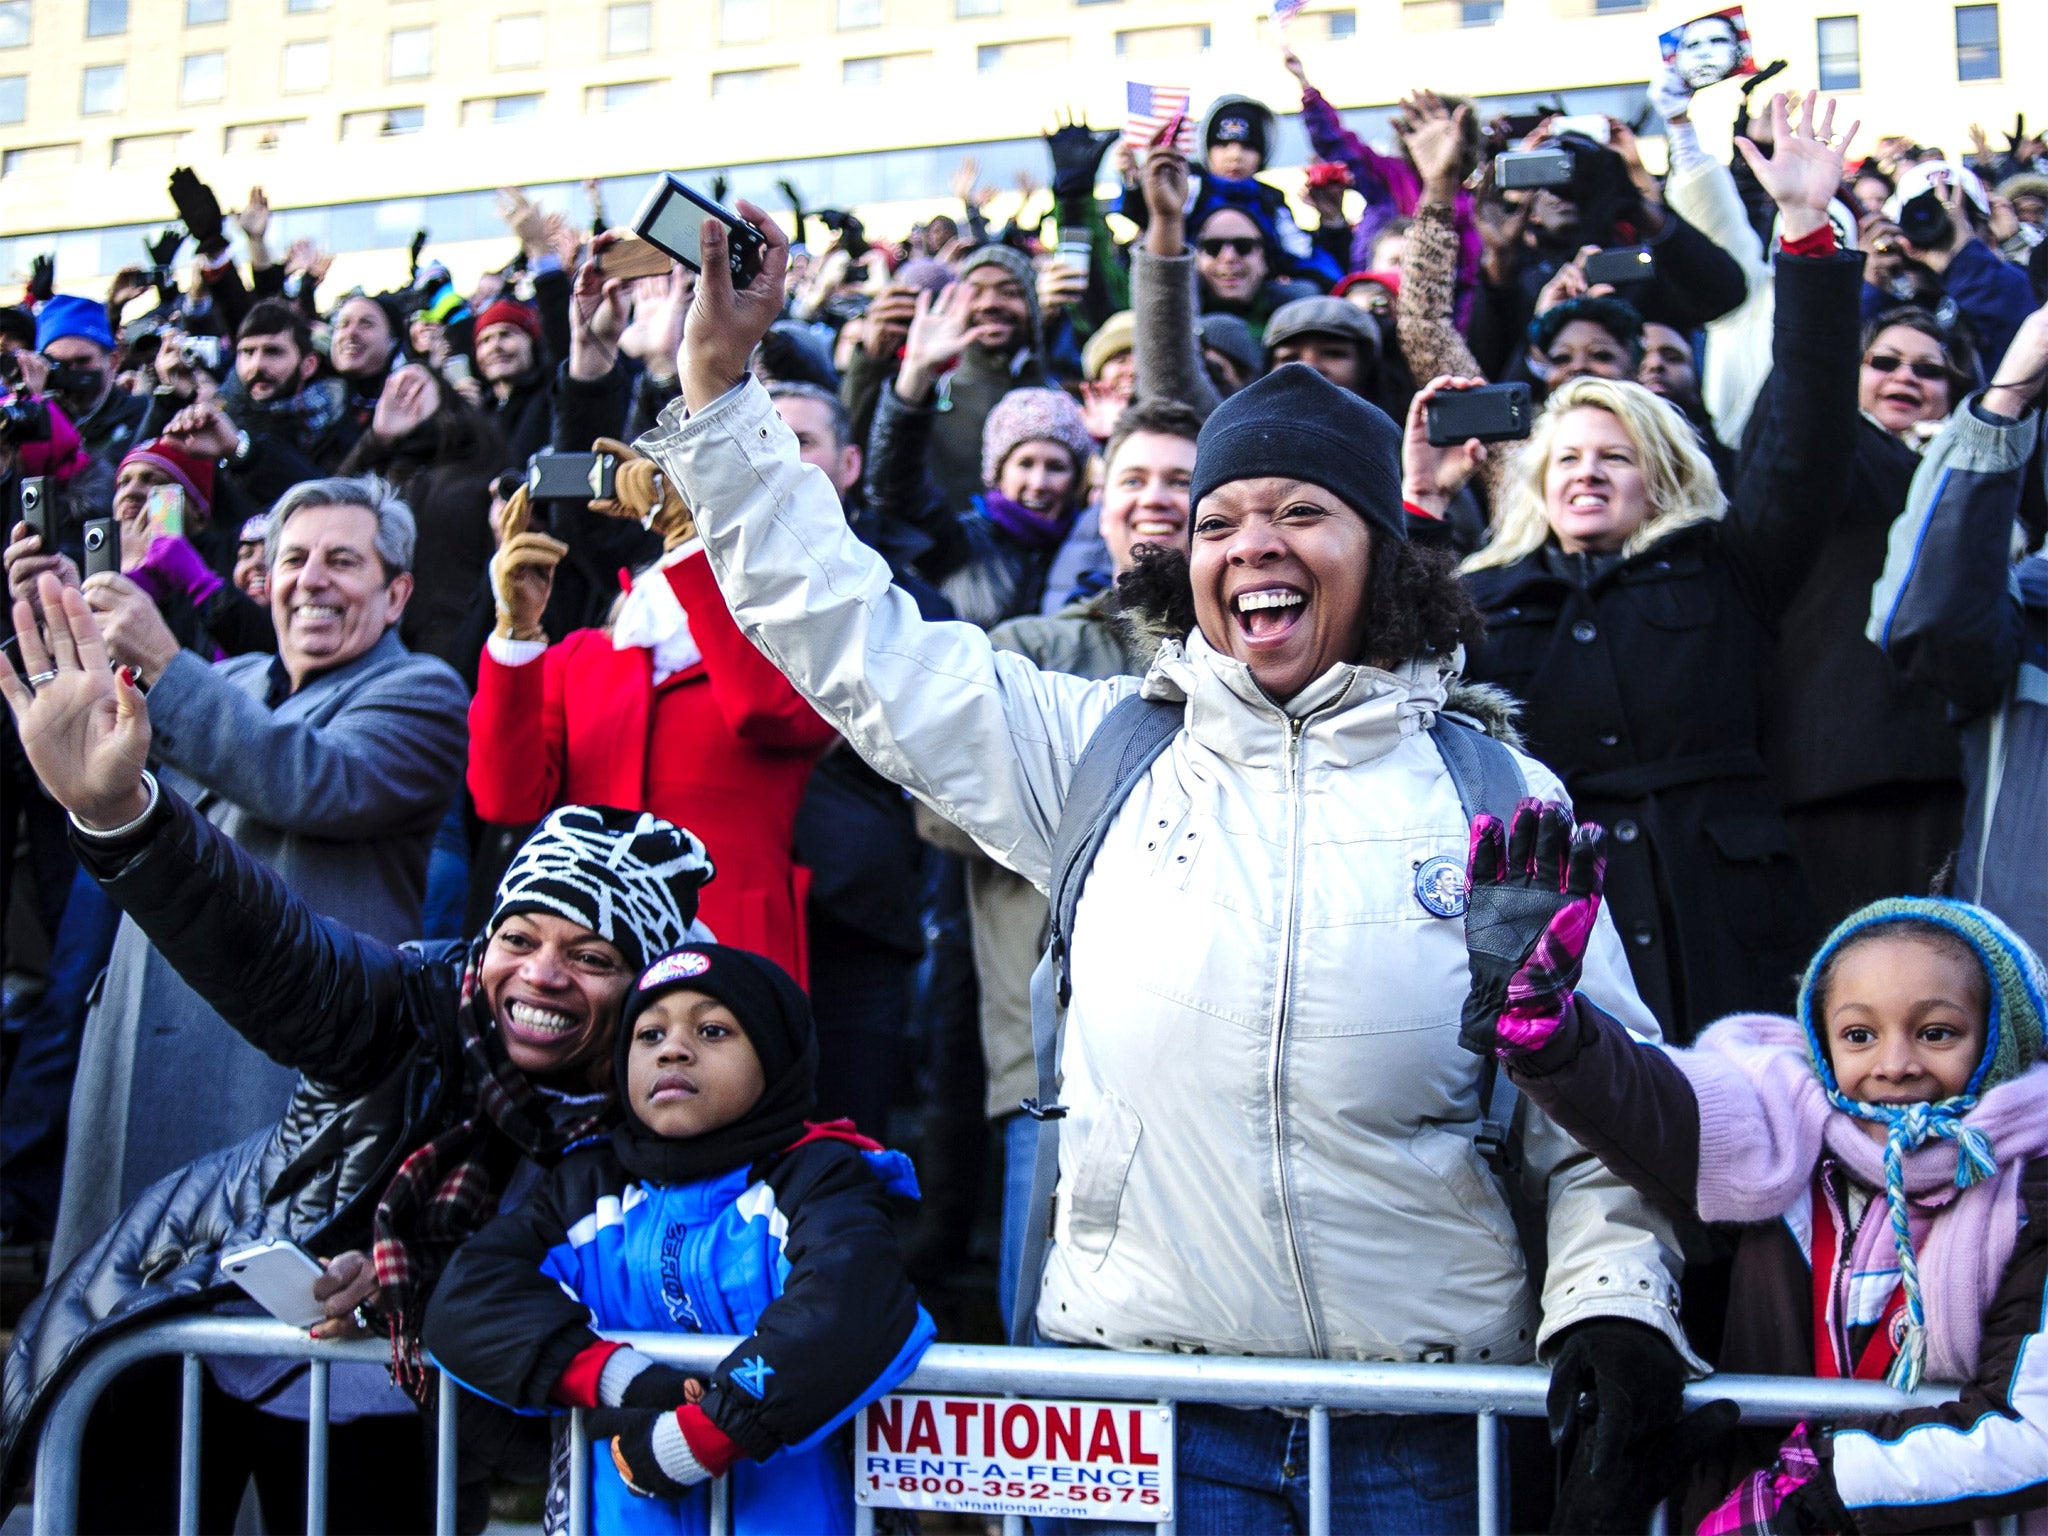 Spectators wave to President Barack Obama as the inaugural parade moves down Pennsylvainia Avenue